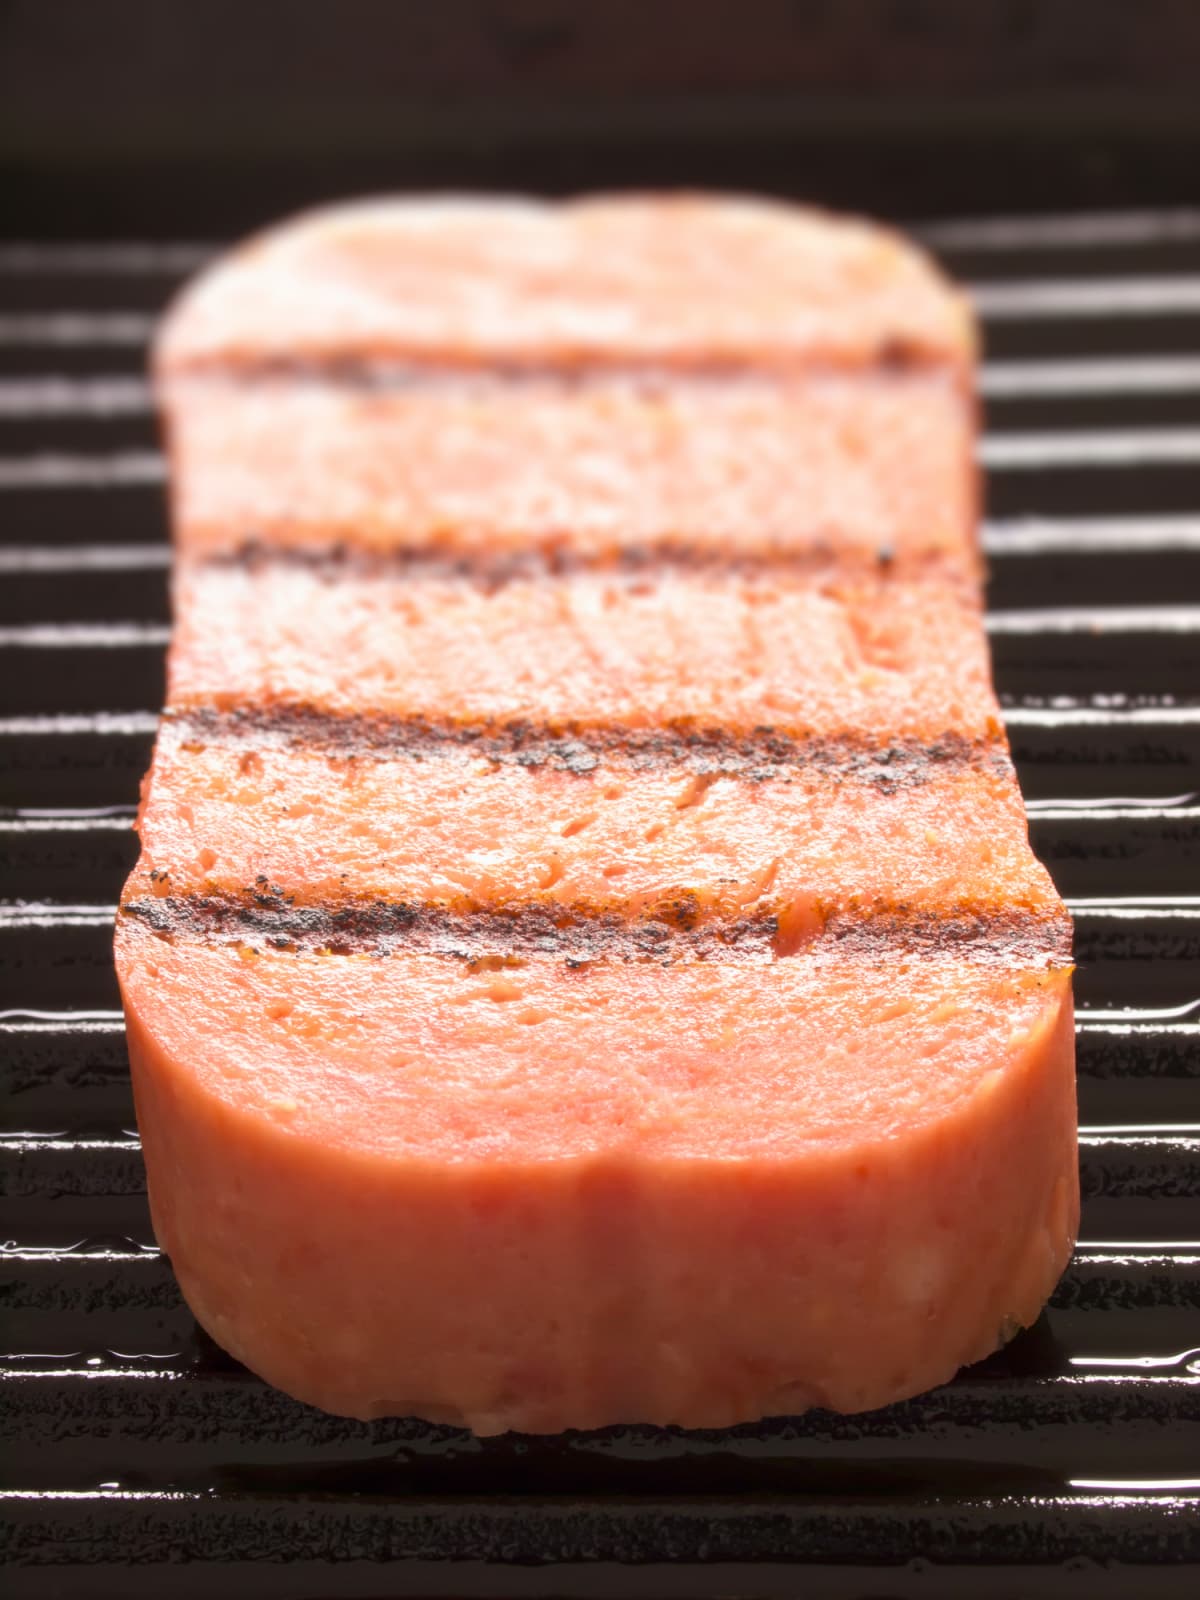 Slice of spam on a grill